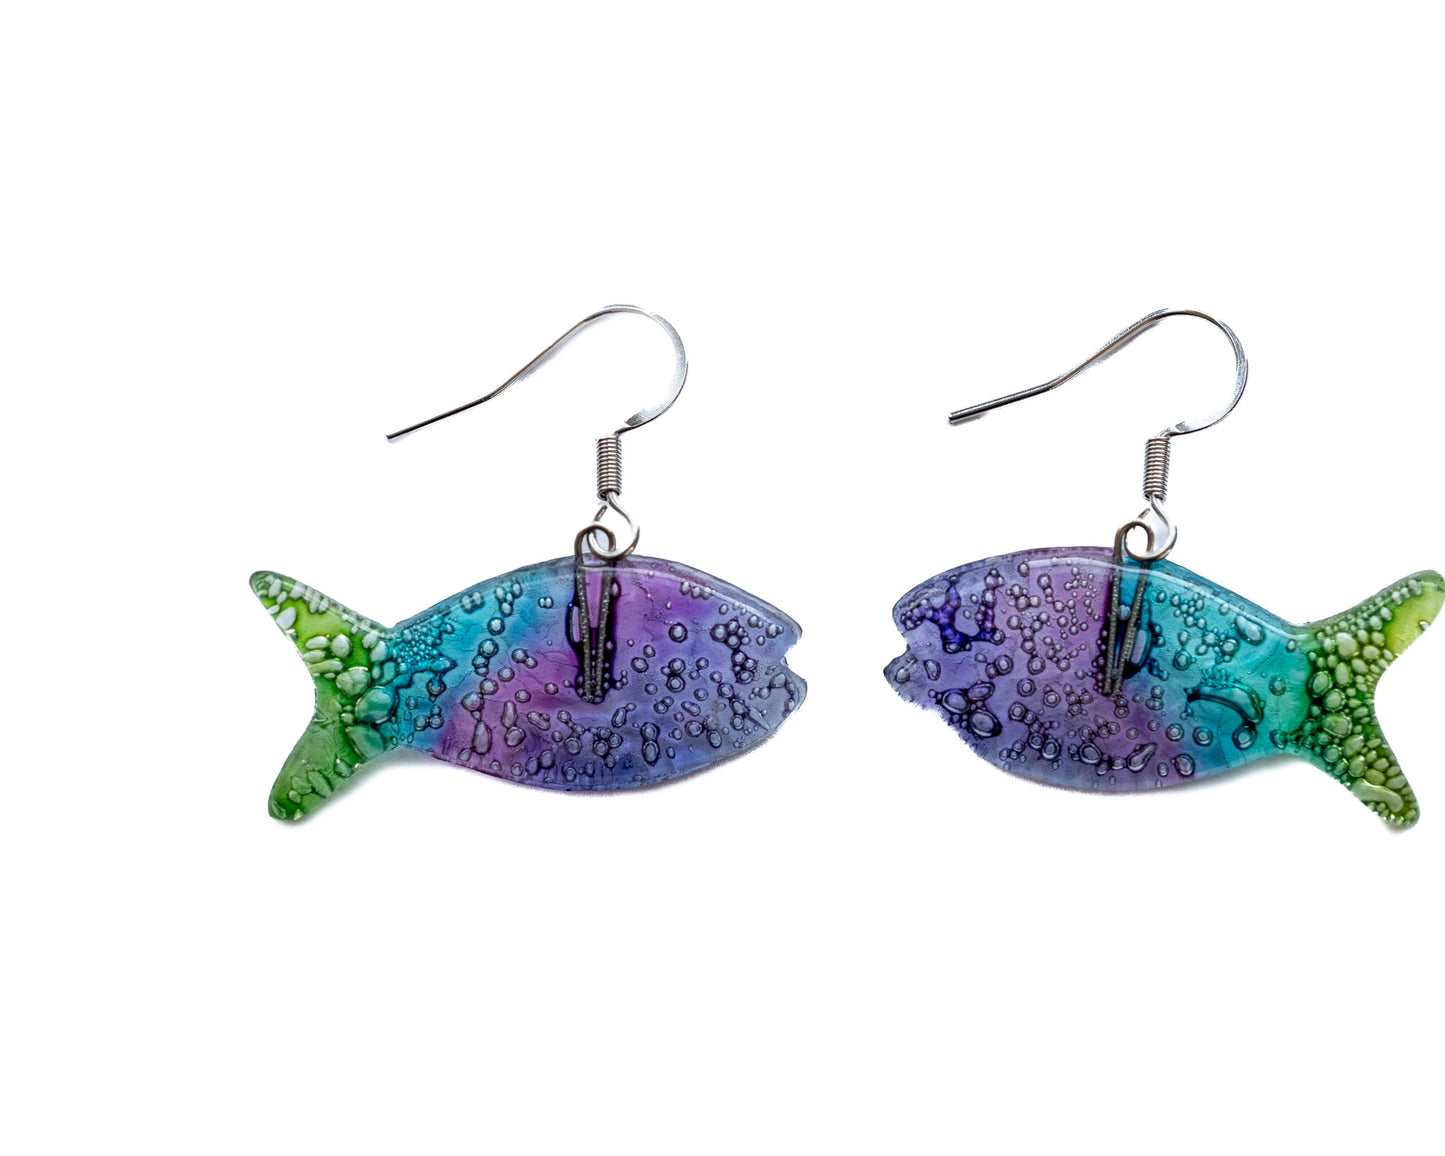 Earrings Crafted from Recycled CDs